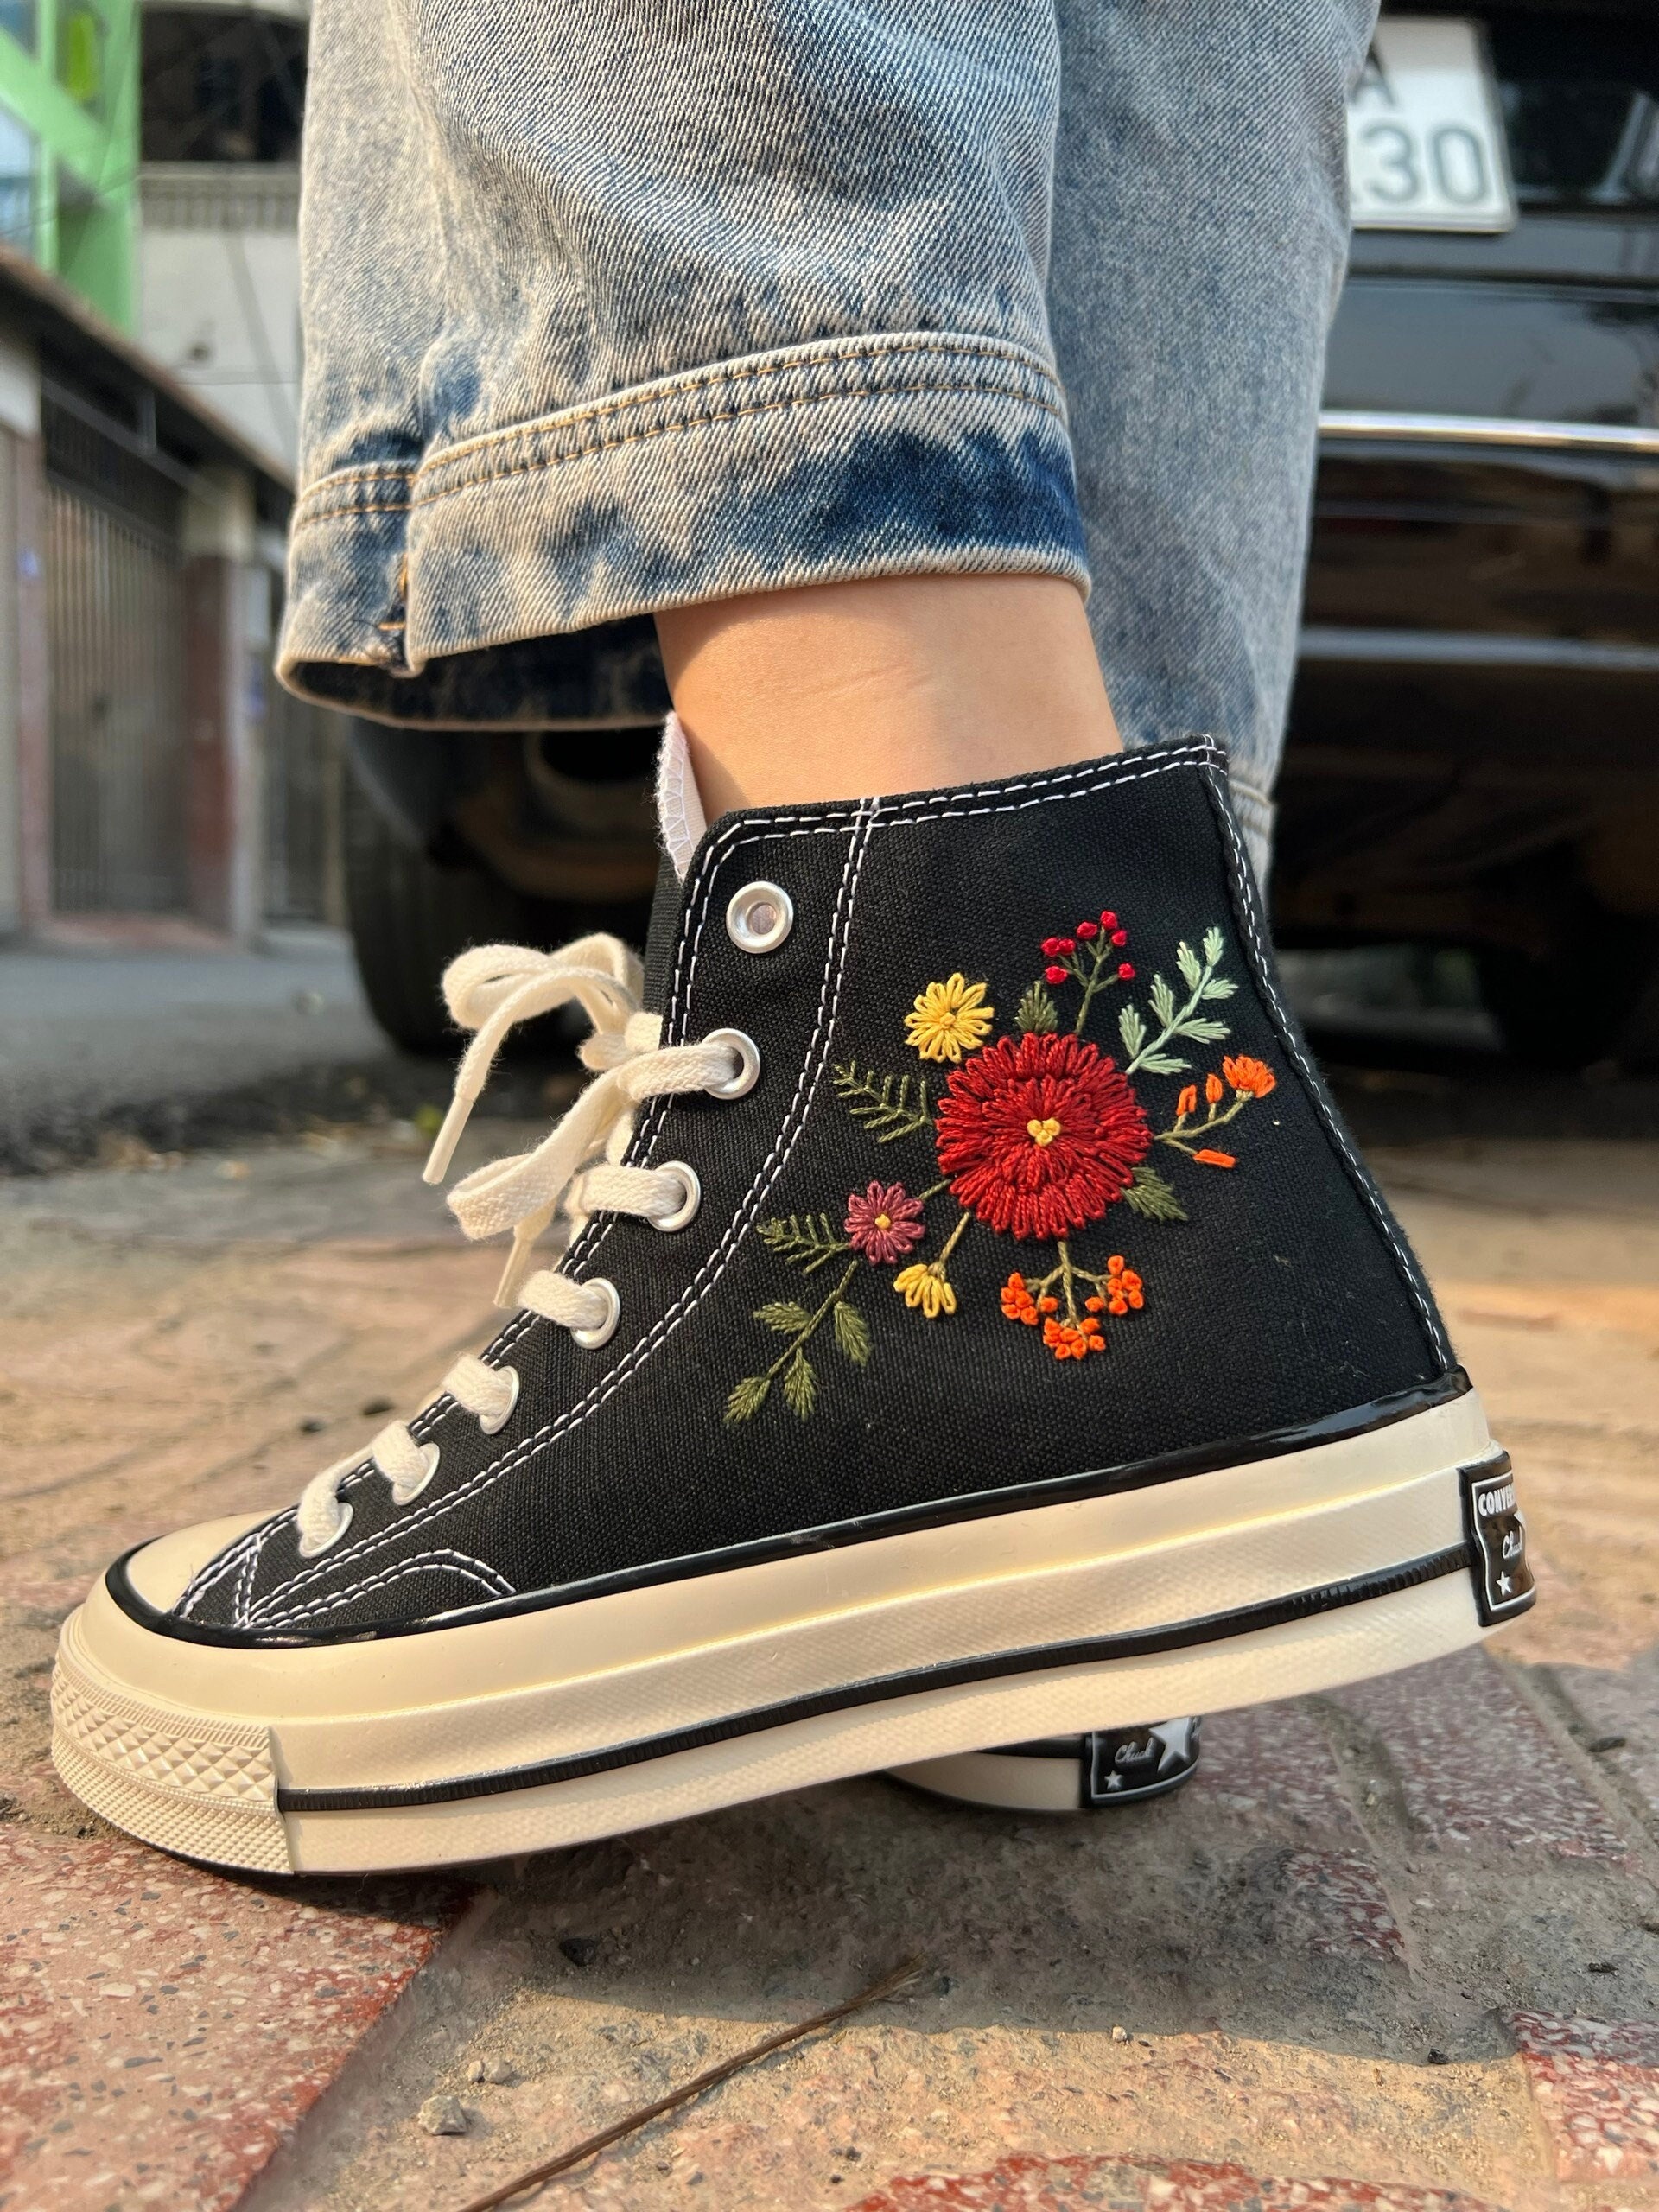 Embroidered Converse/embroidered Sneakers Etsy